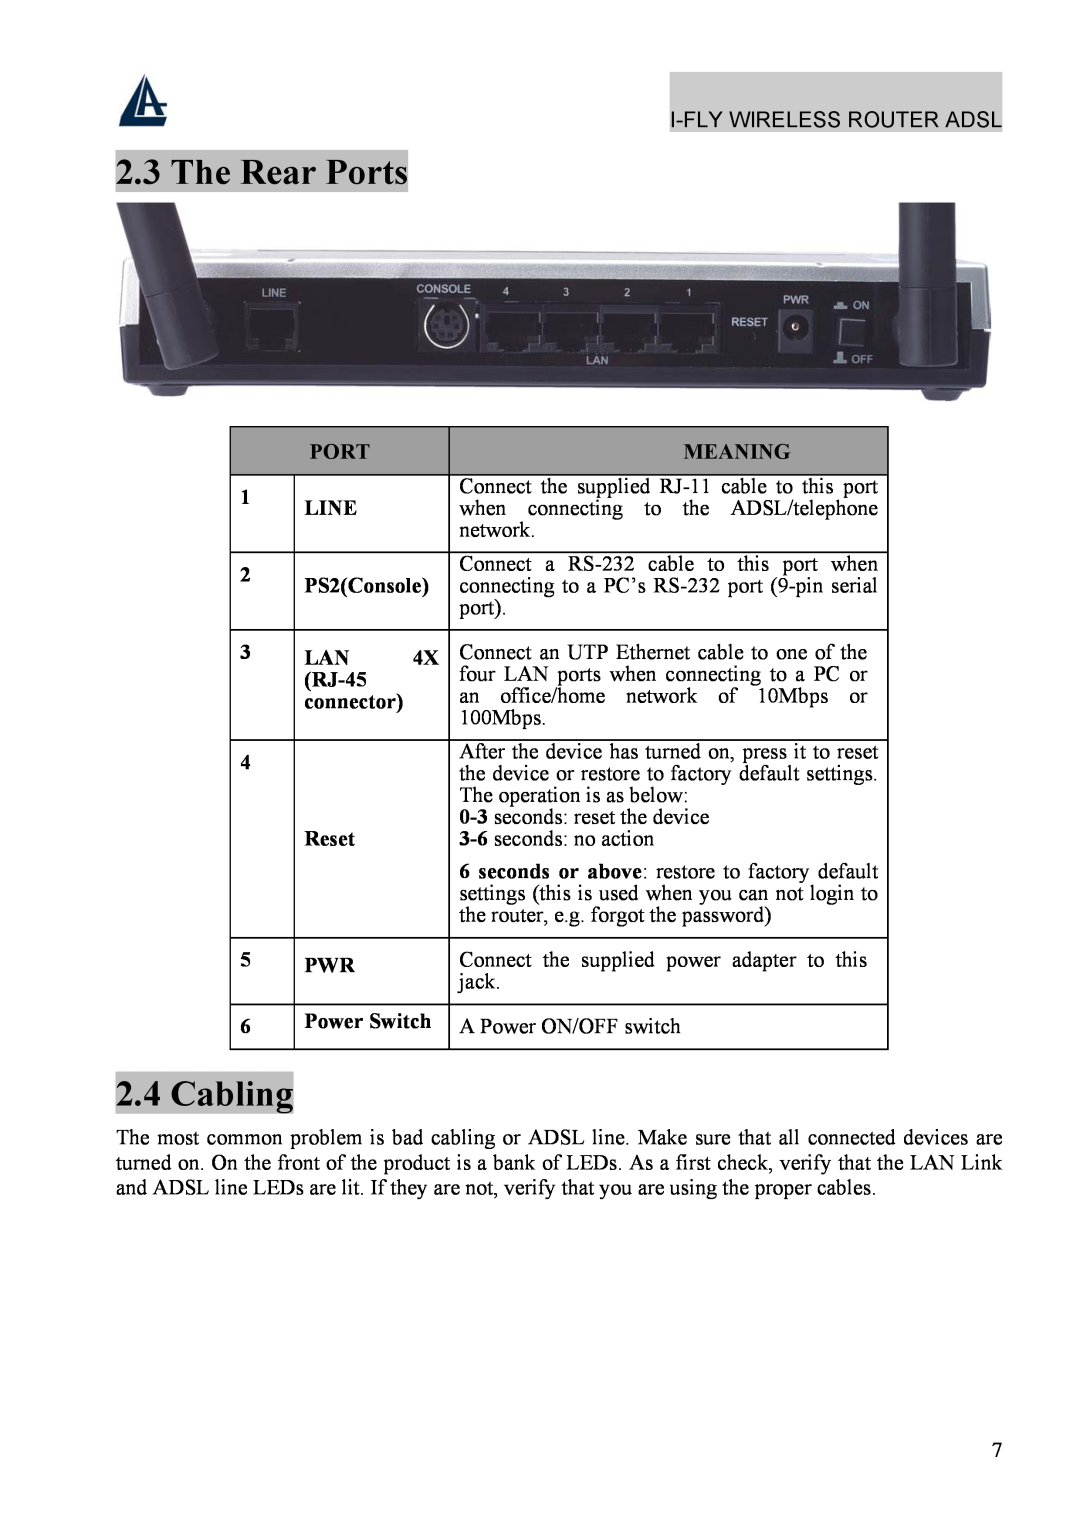 Atlantis Land A02-WRA4-54G manual The Rear Ports, Cabling, Meaning, Line, PS2Console, RJ-45, connector, Reset, Power Switch 